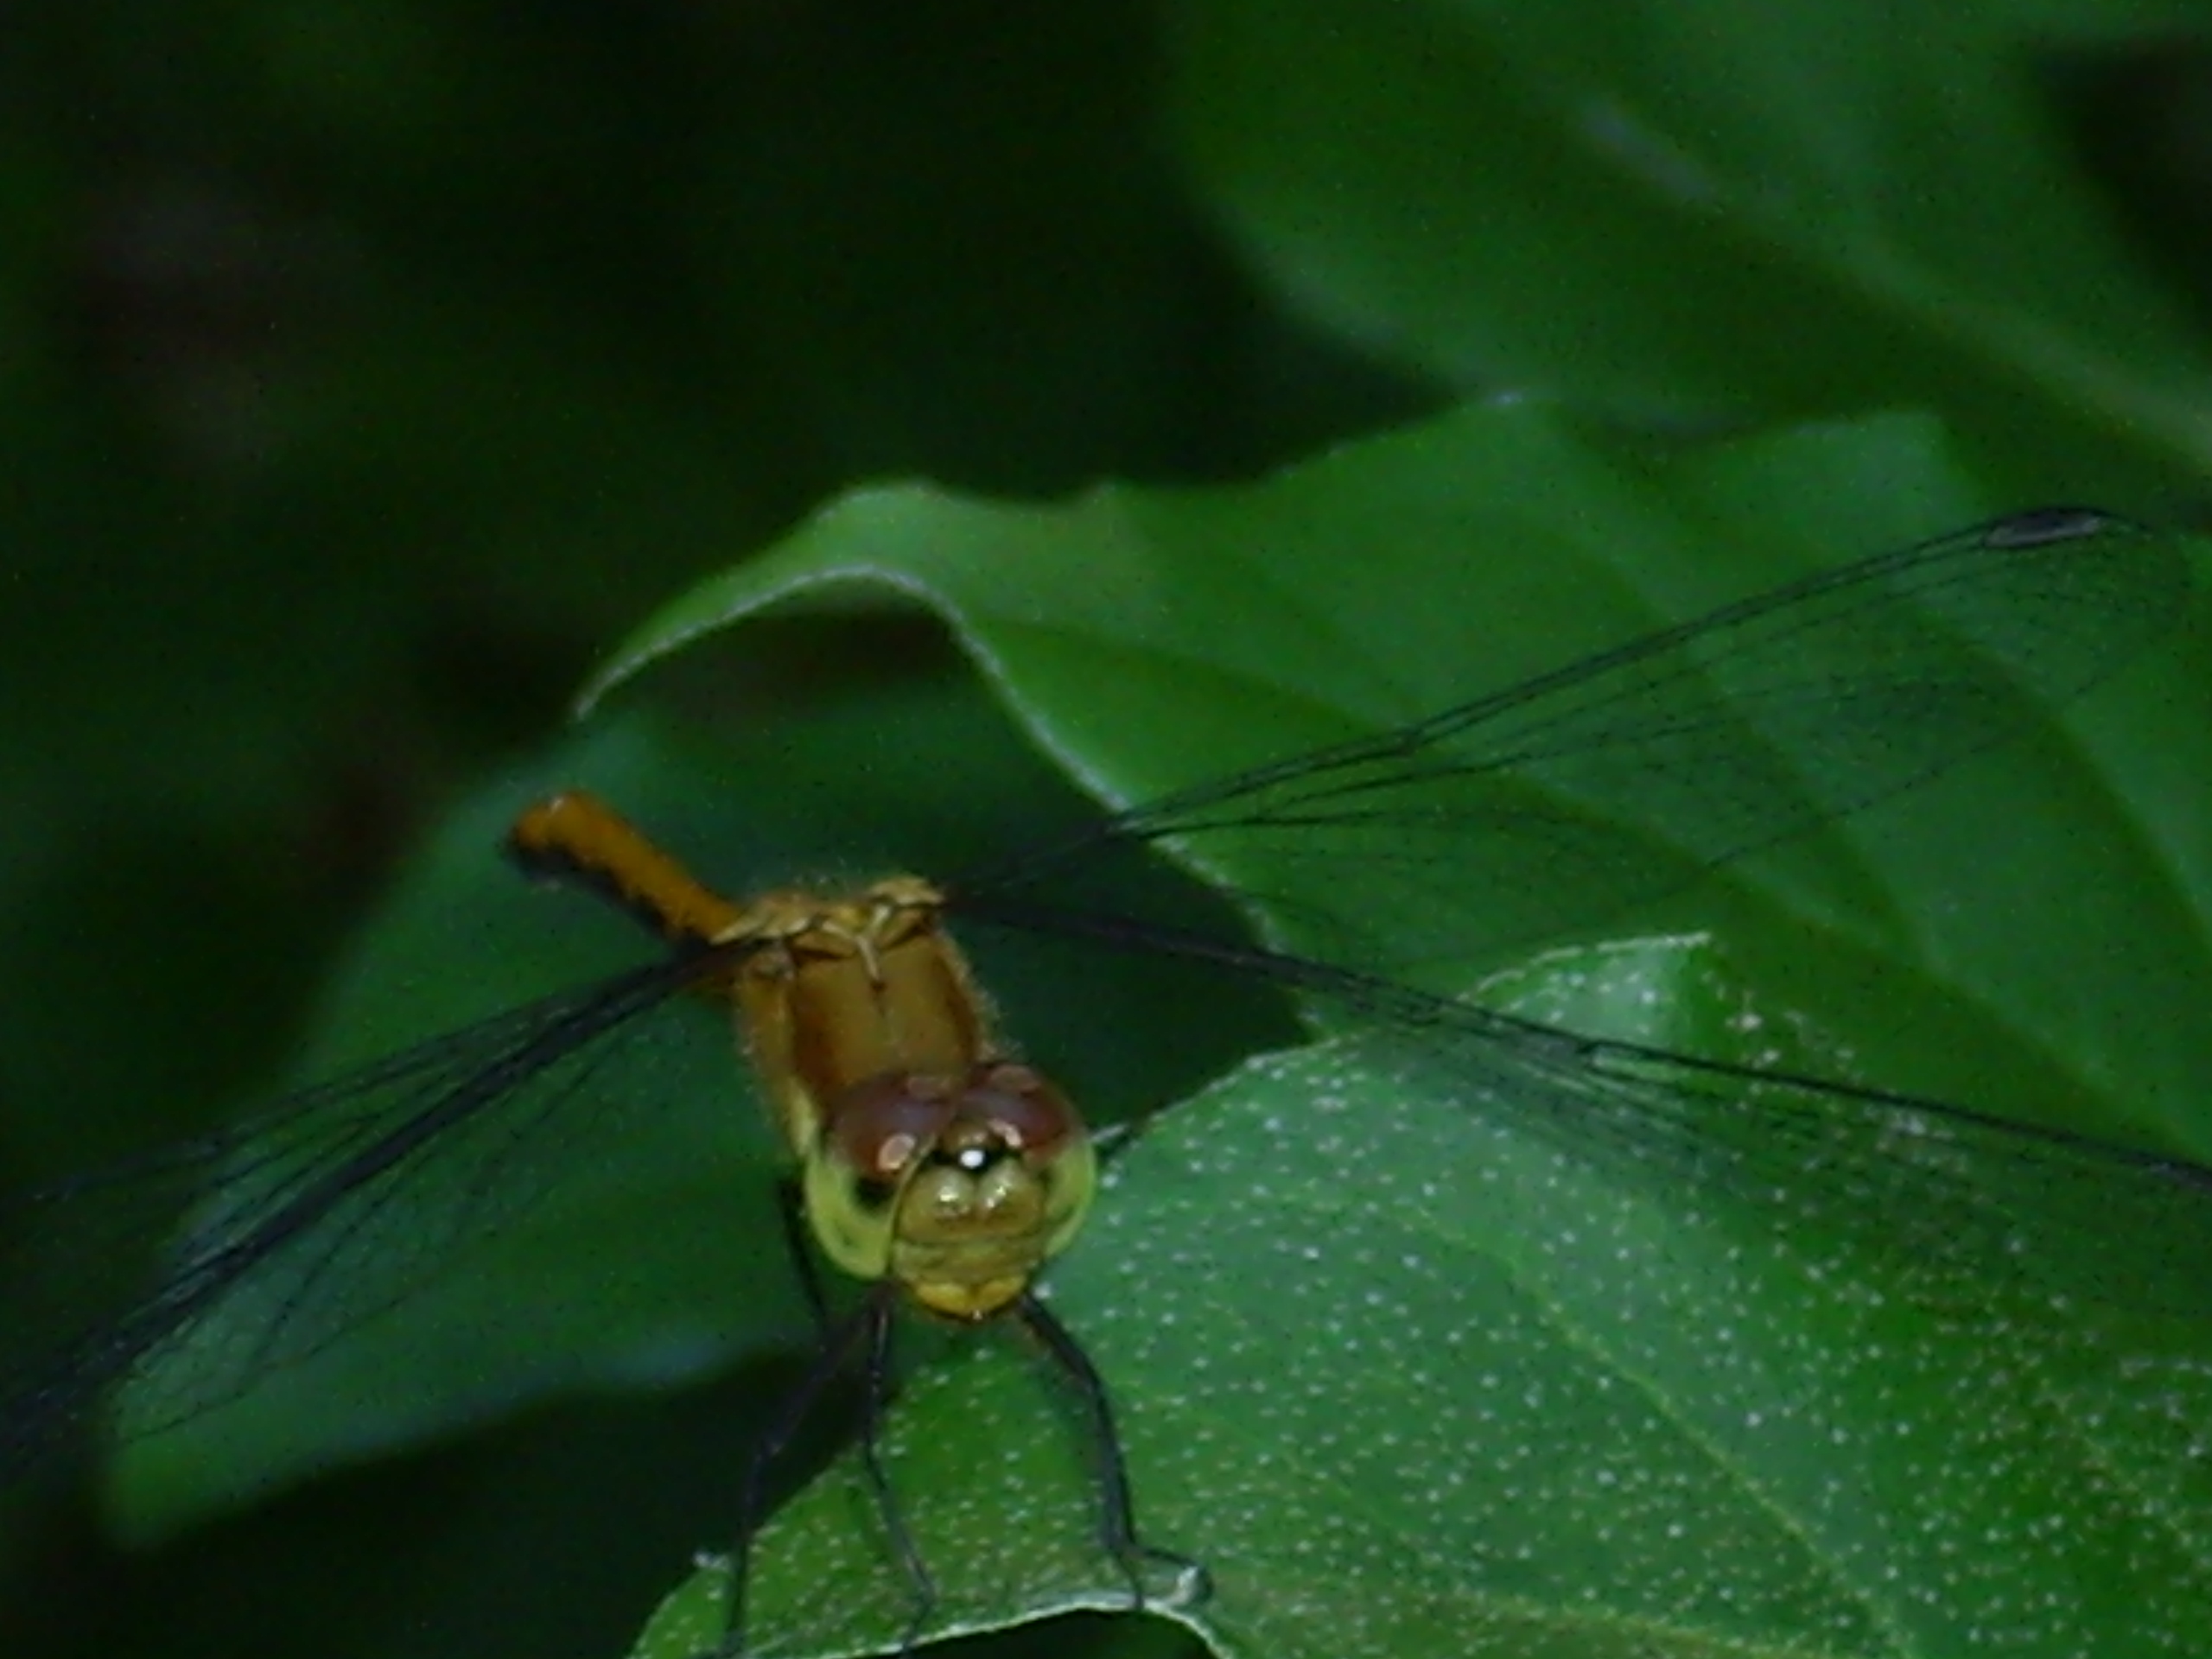 Dragonfly (user submitted)